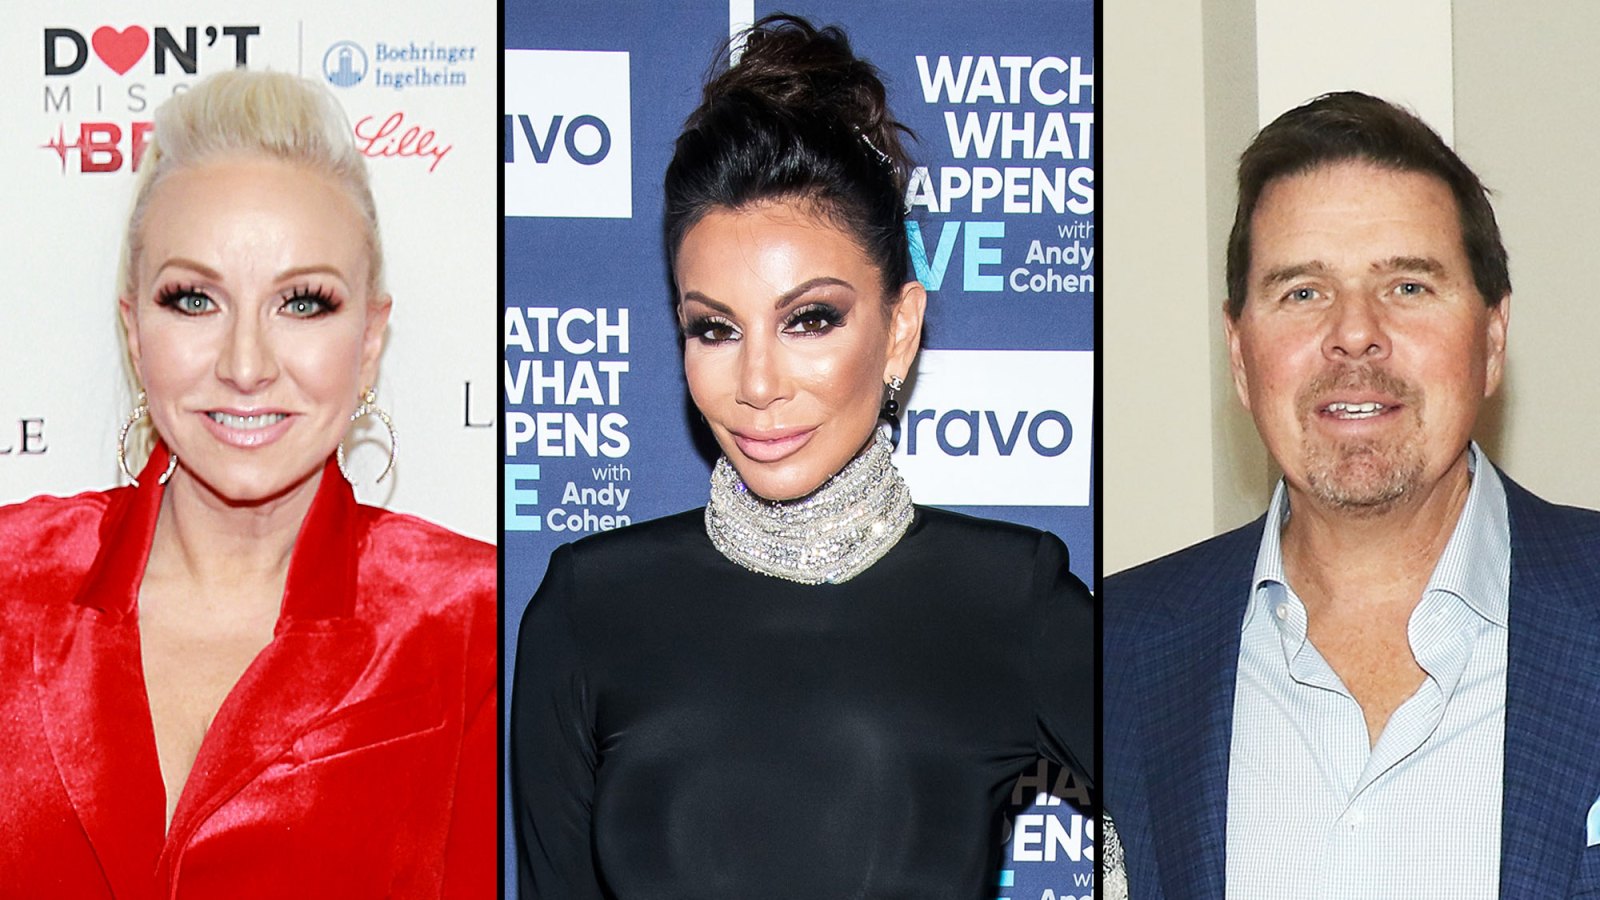 Margaret Josephs Can't Imagine Anyone Would Want to Marry Danielle Staub Again After Marty Caffrey Drama